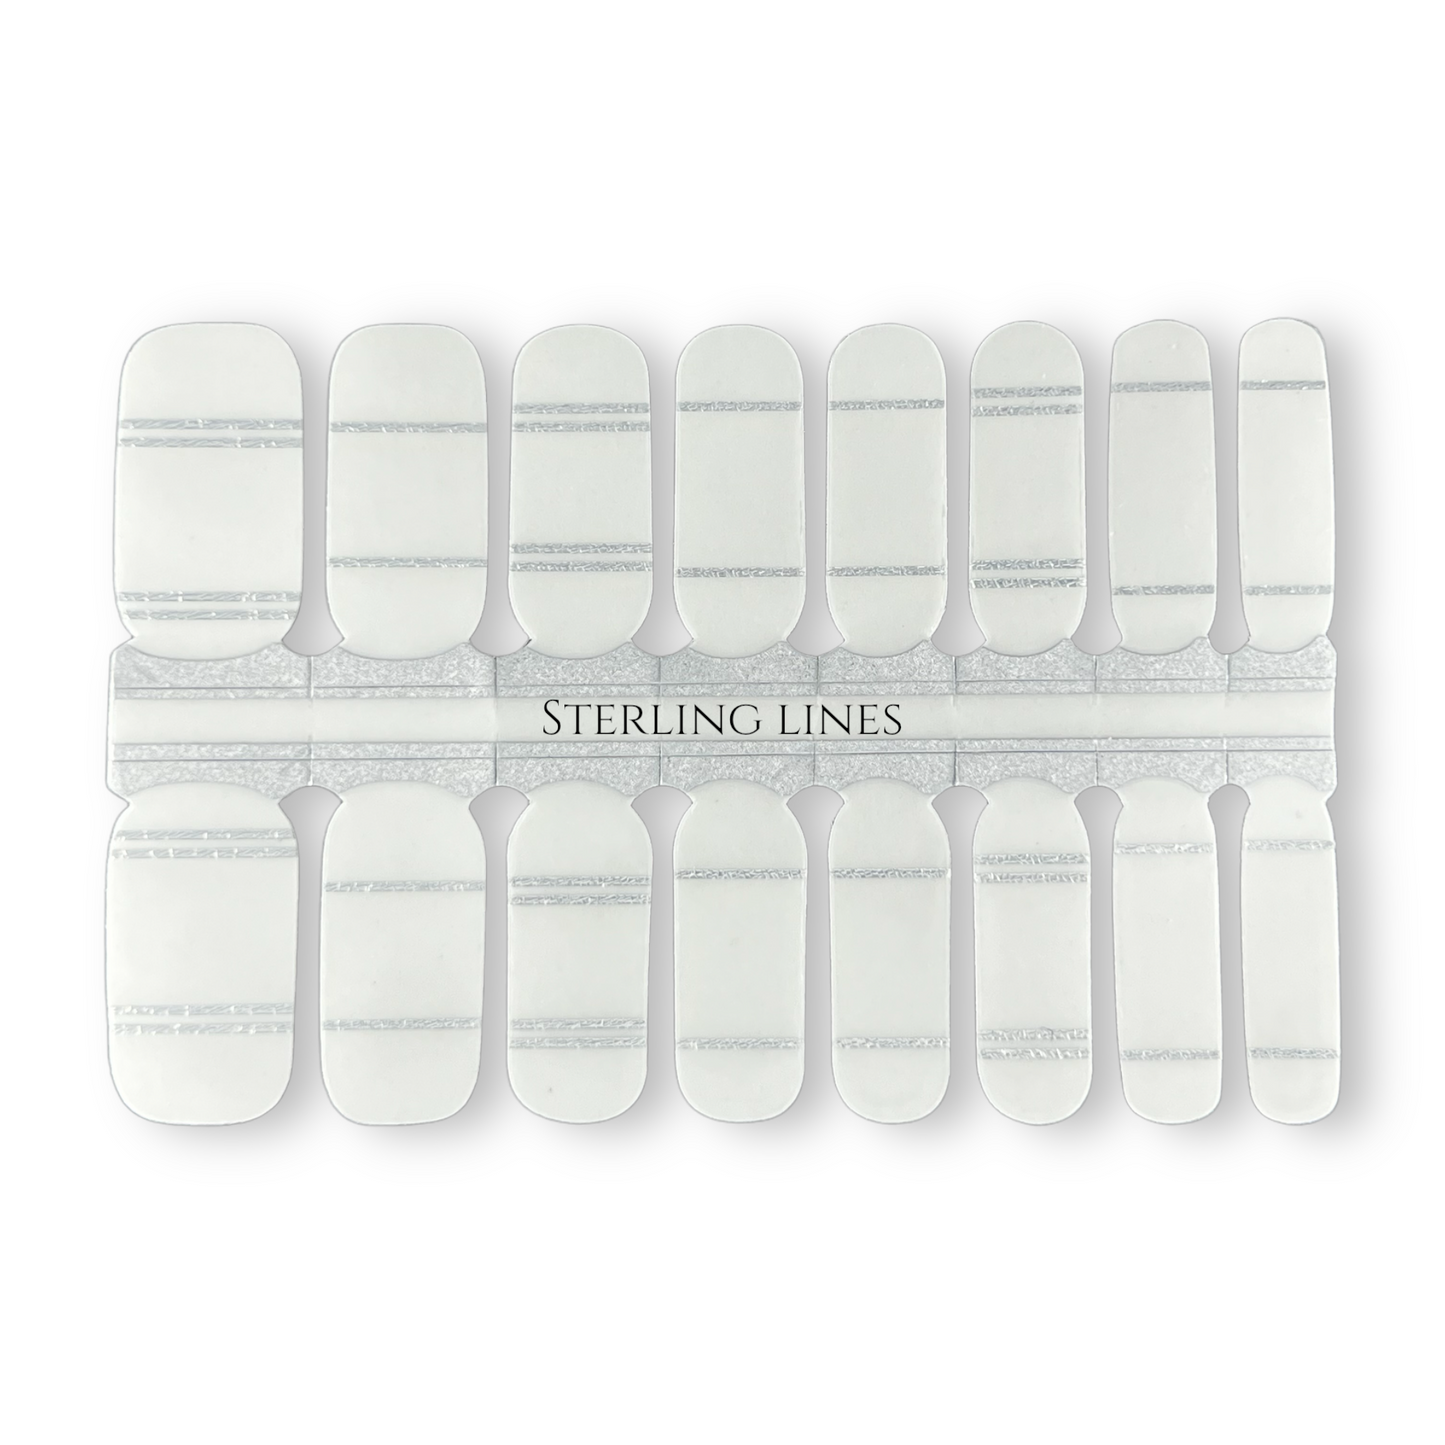 STERLING LINES